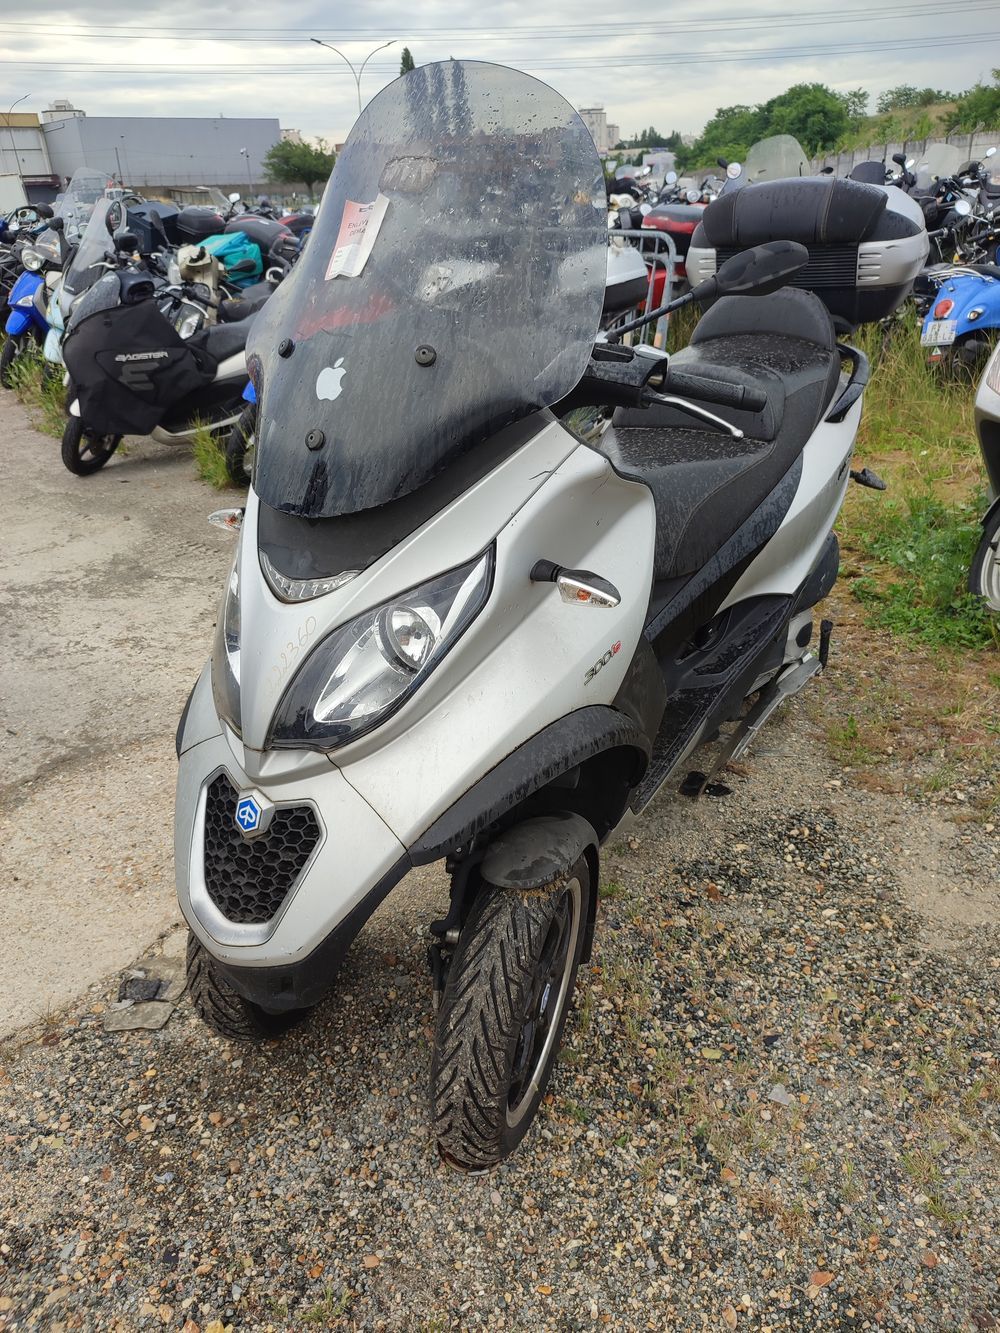 Null [RP][ACI] PIAGGIO MP3 300ie, Gasoline, imm. DL-348-XS, Type LGG94H70P676, s&hellip;